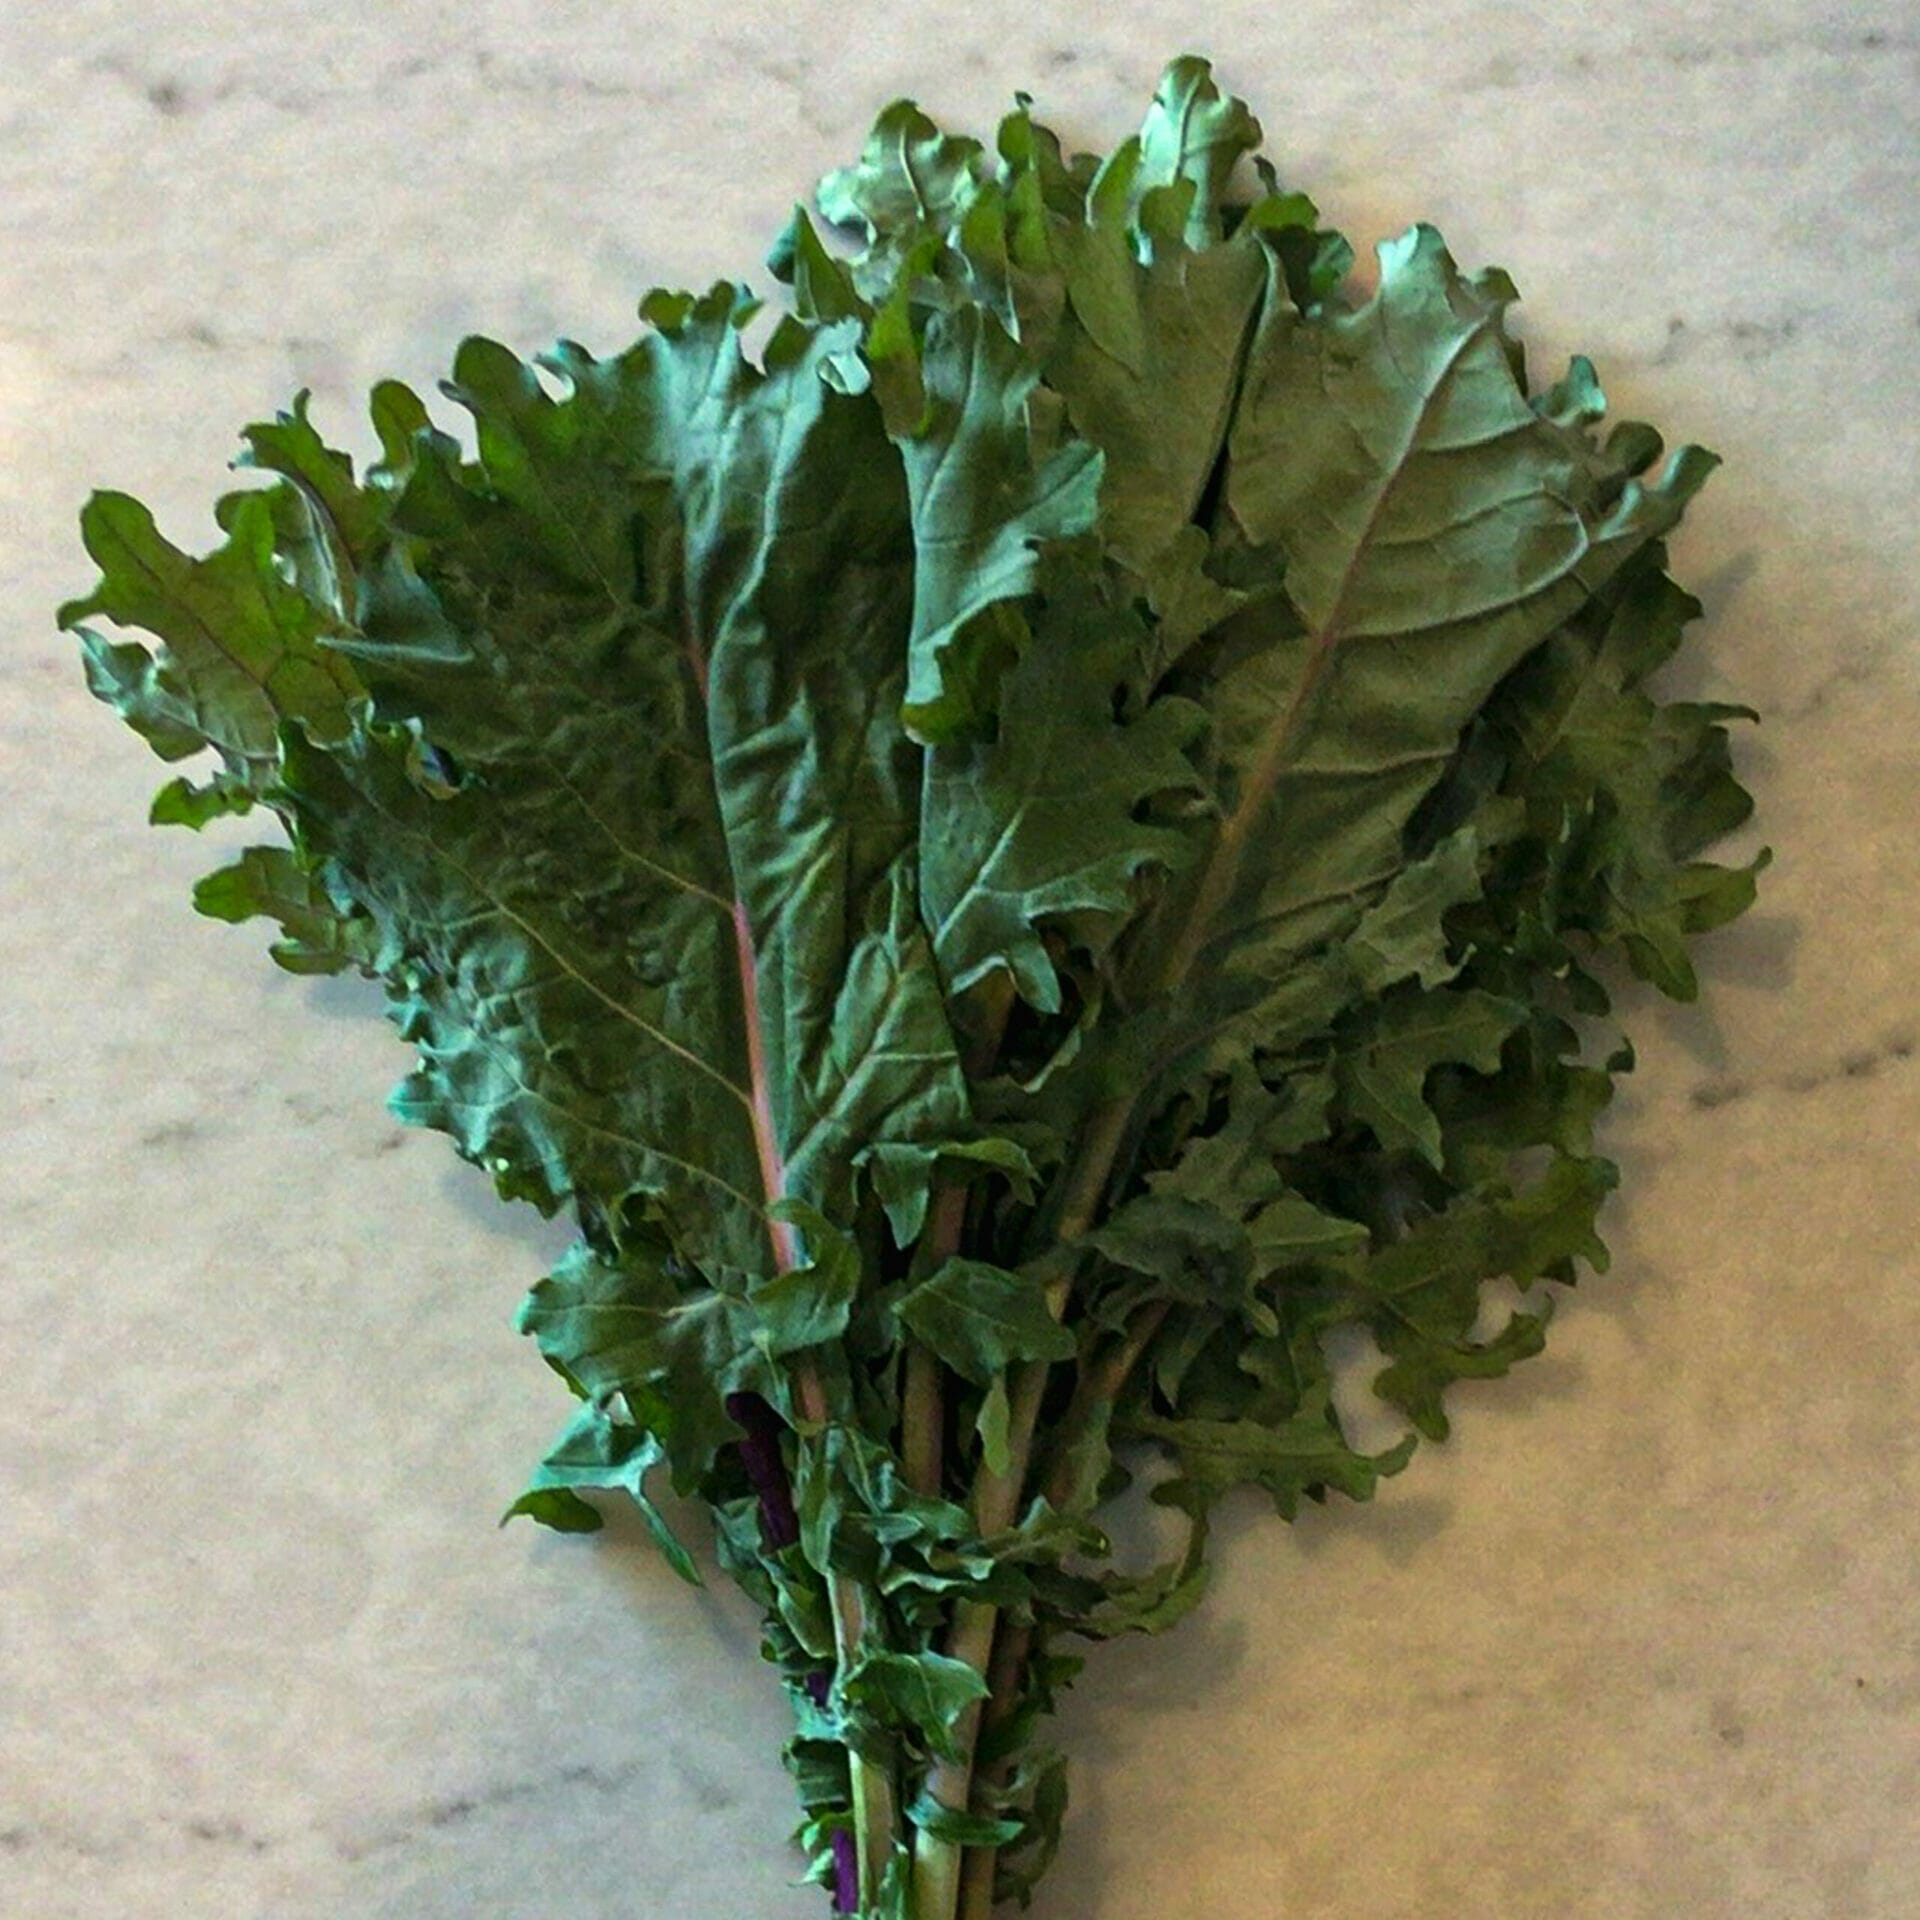 Red Russian Kale Bunches